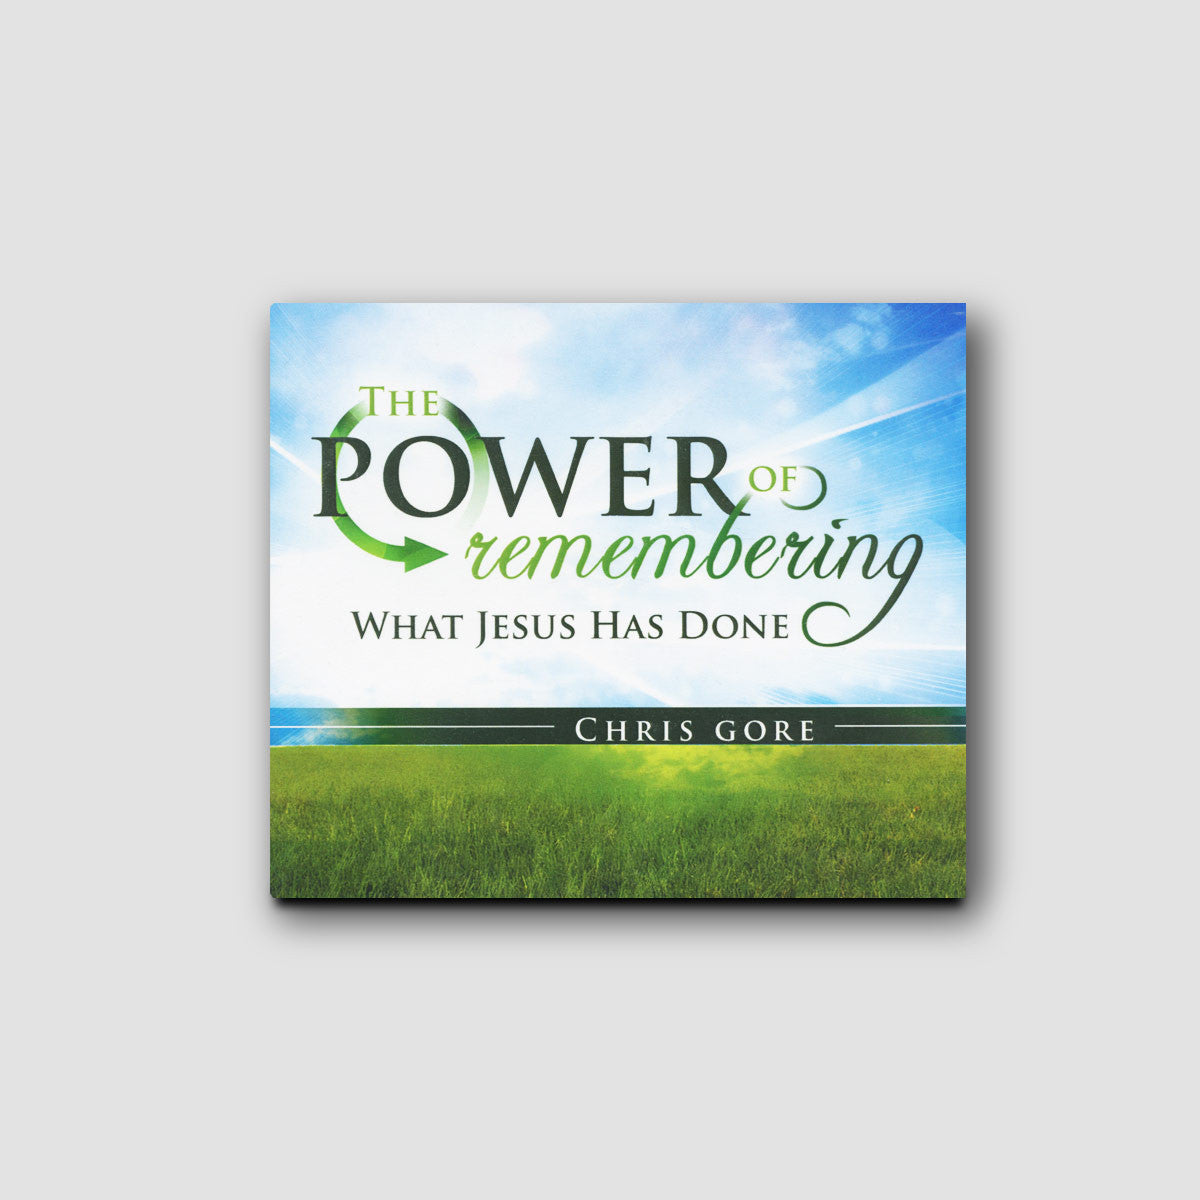 The Power of Remembering